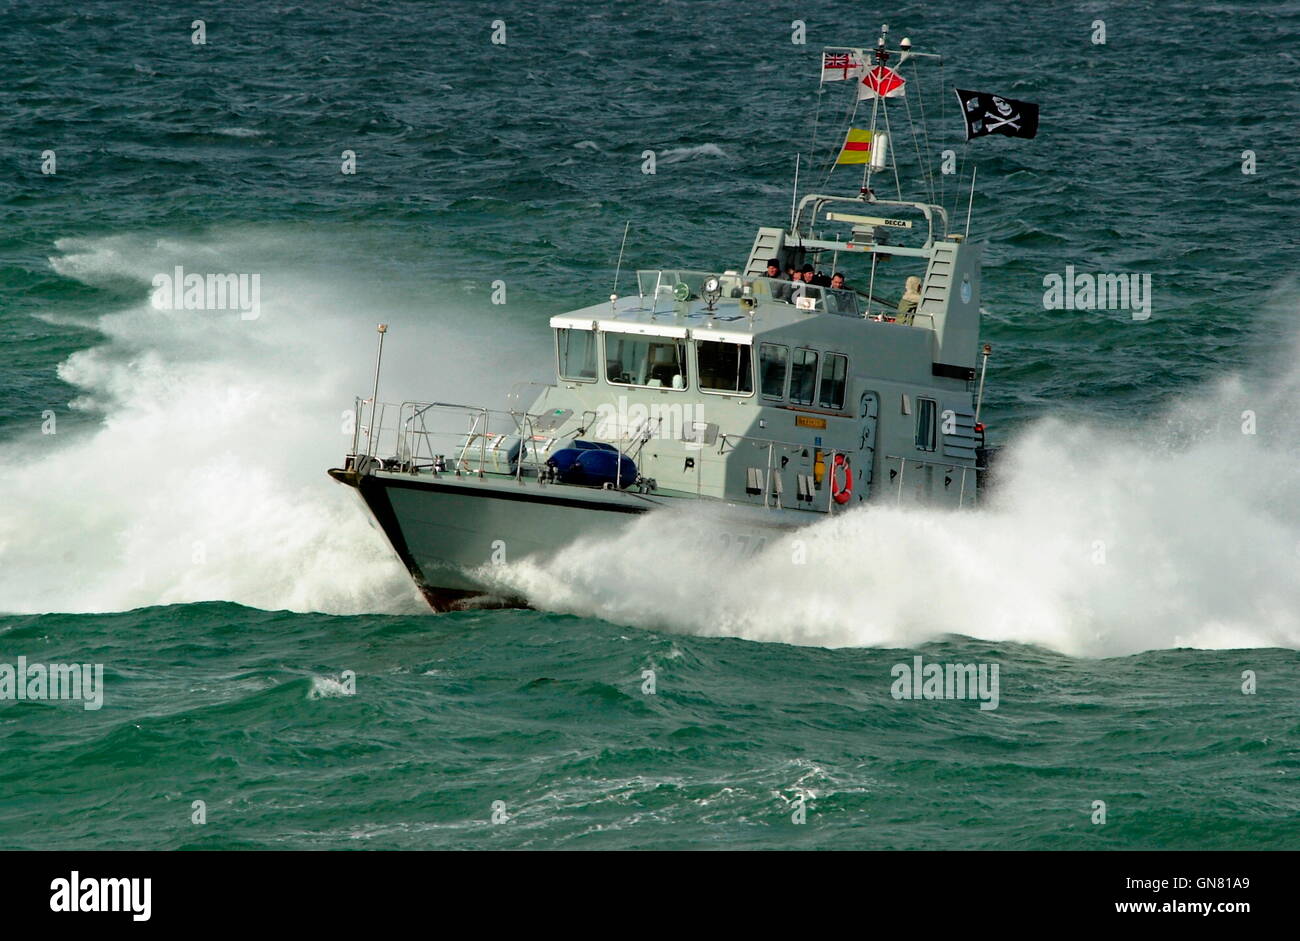 AJAXNETPHOTO. 5TH OCT, 2004. AT SEA, CHANNEL. - STAFF COLLEGE SEA DAYS P2000 TYPE FAST PATROL BOAT HMS TRACKER PLAYS THE BANDIT, APPROACHING HMS GRAFTON AT SPEED IN MOCK ATTACK..  PHOTO:JONATHAN EASTLAND/AJAX.  REF: 40510_1011. Stock Photo